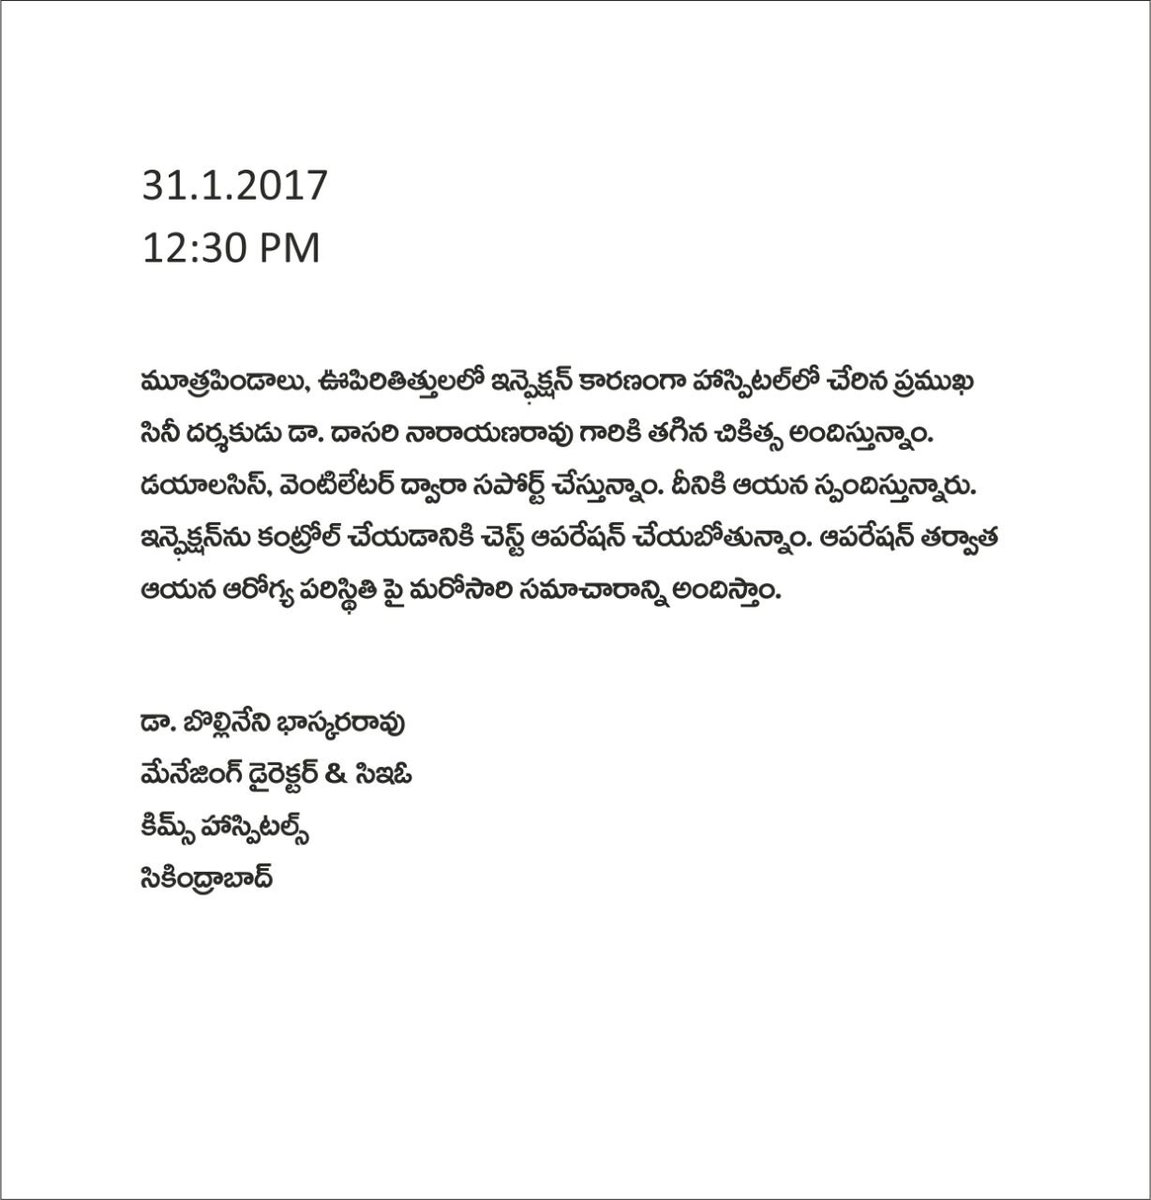 Press release from KIMS Management about Dasari Narayana Rao's health condition